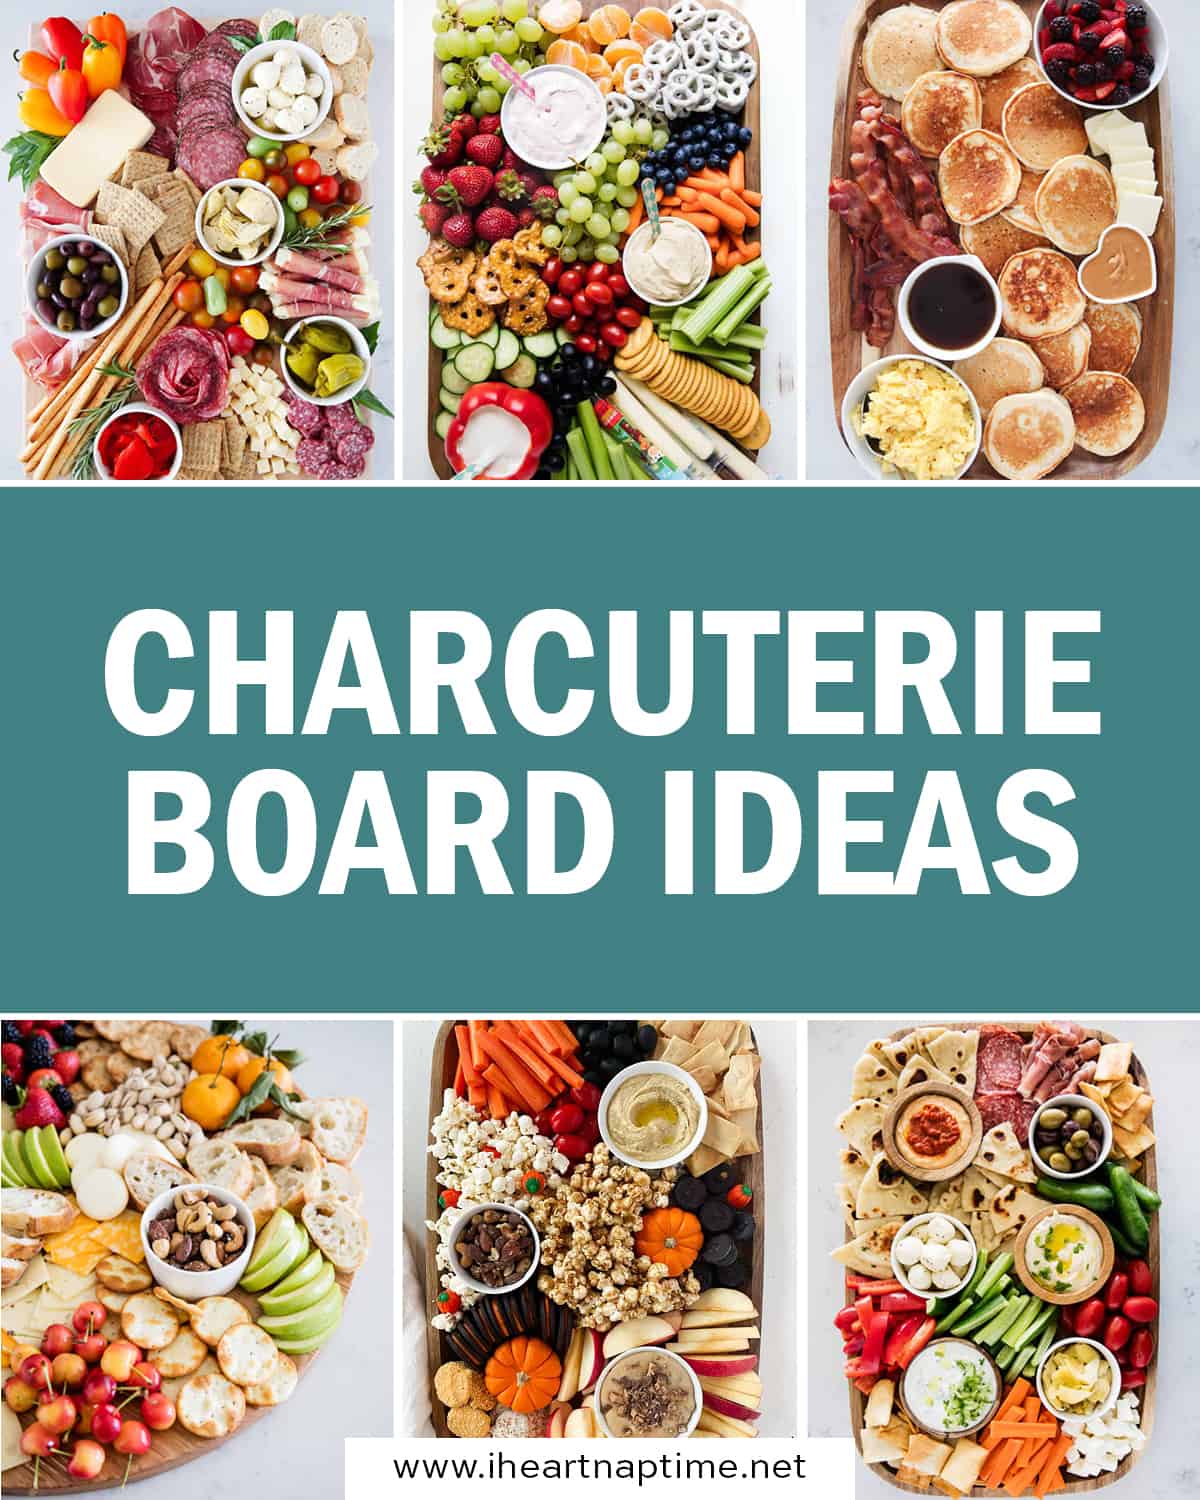 Charcuterie Board Ideas in a collage.